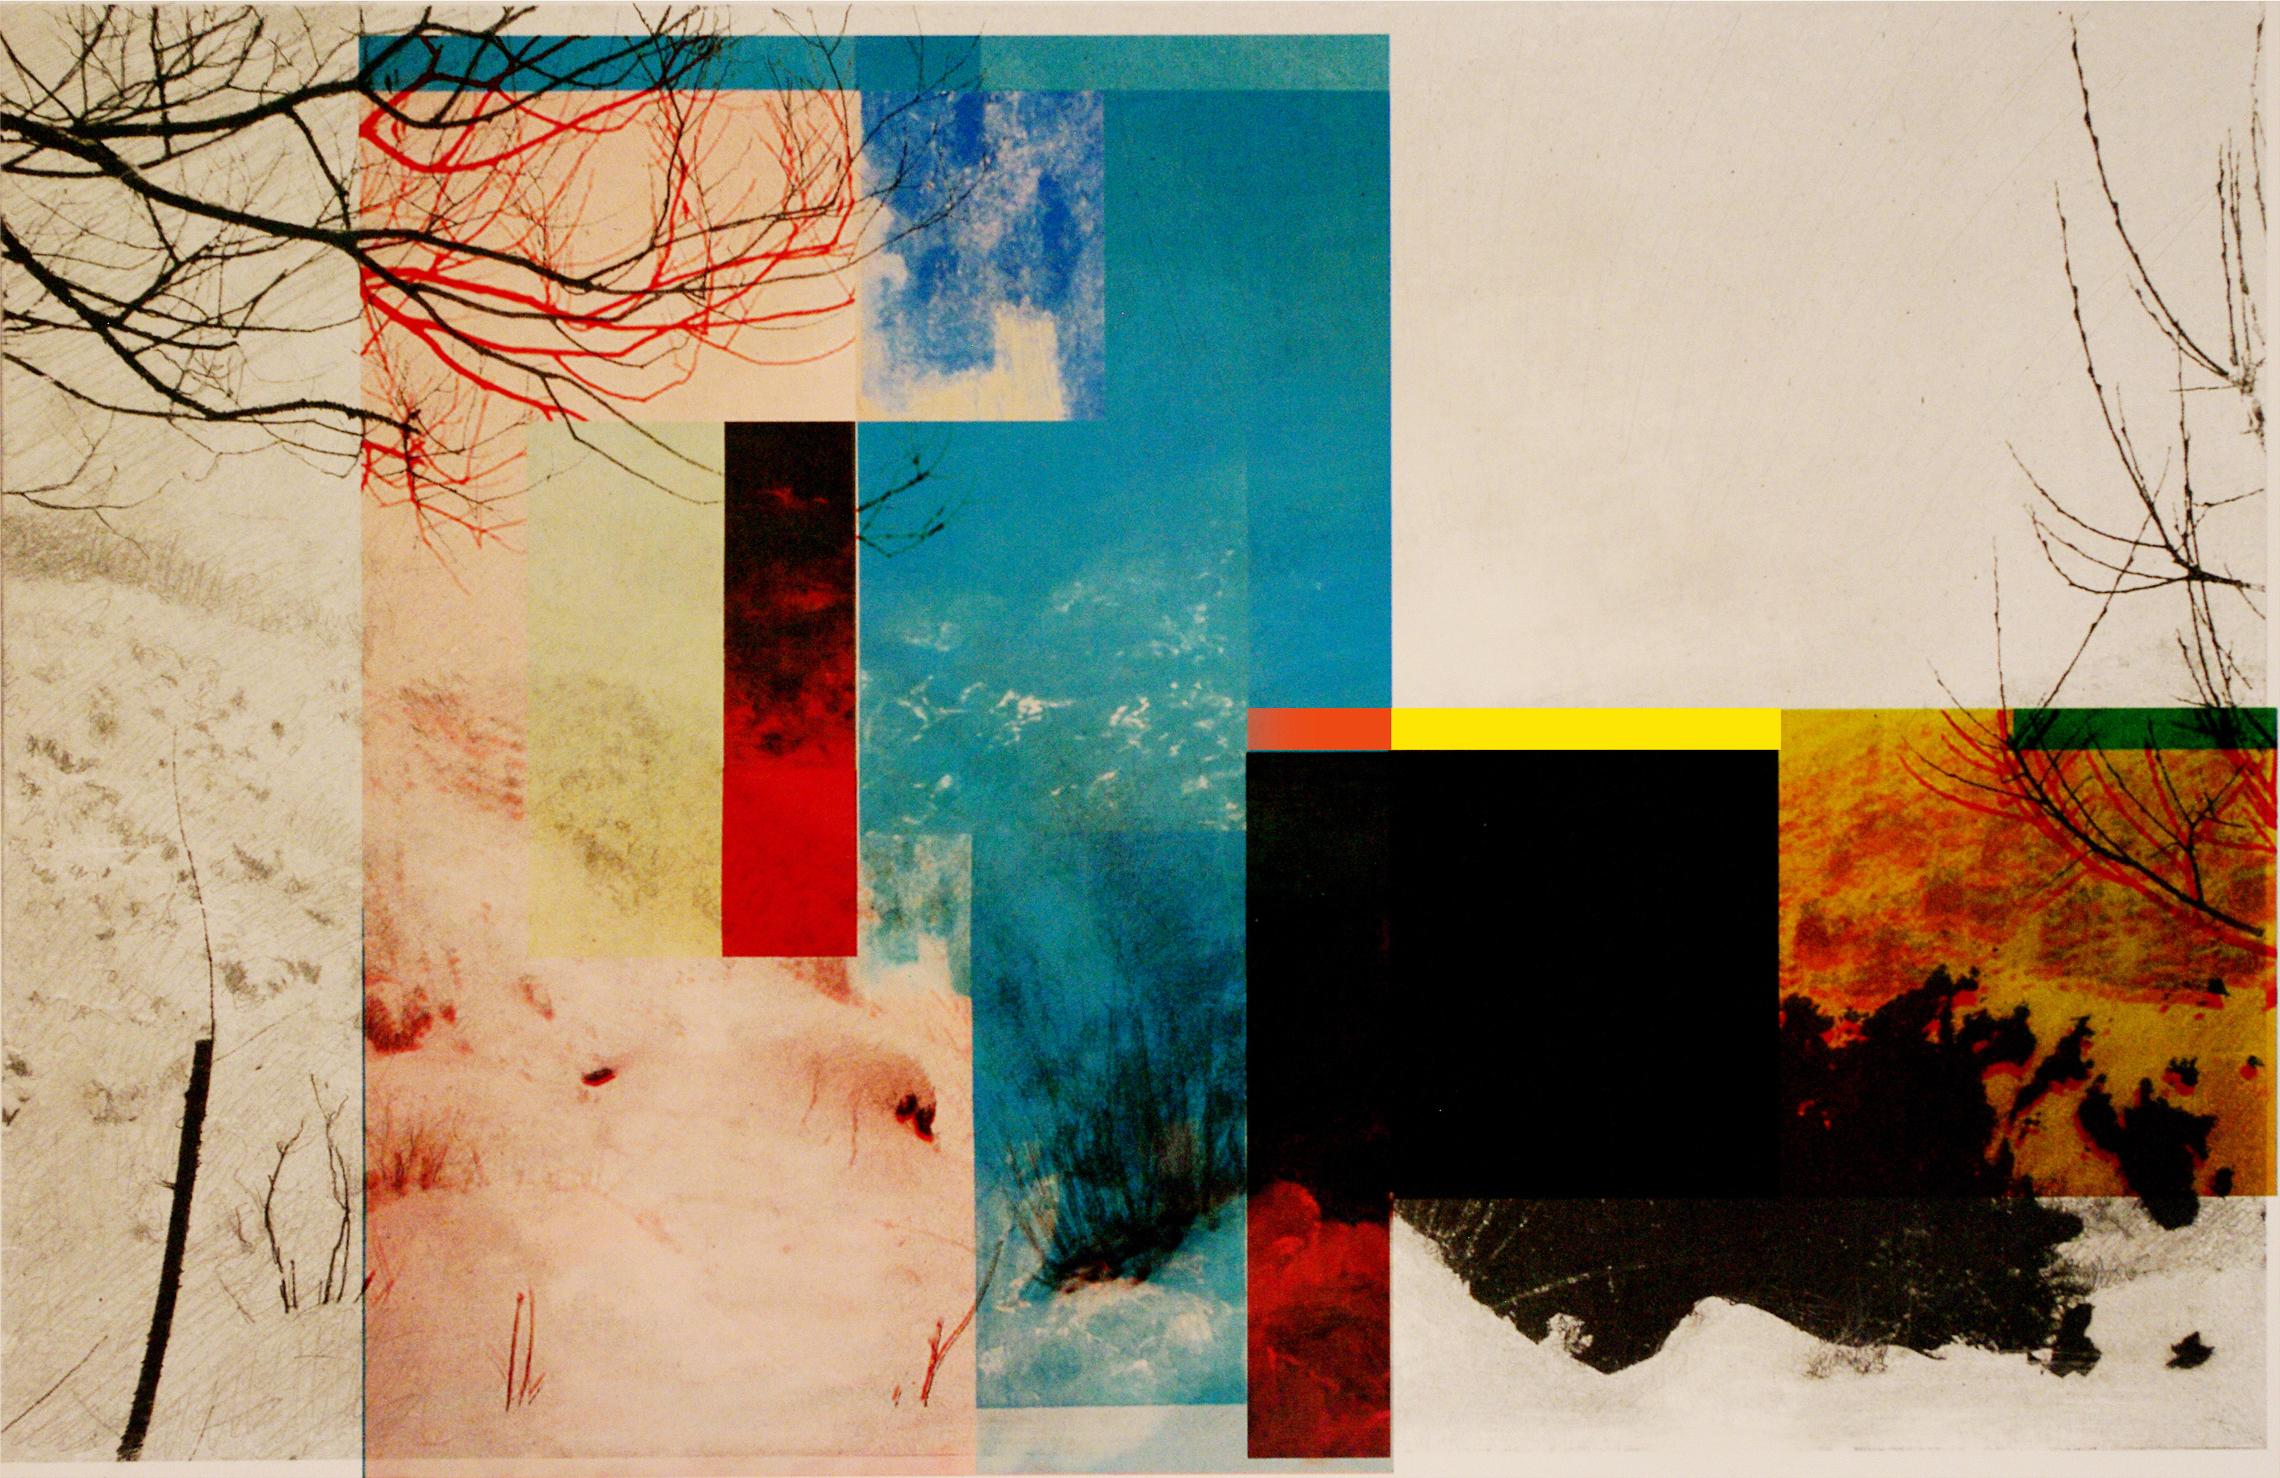 Mb16-Contemporary, Abstract, Minimalism, Modern, Draw, Surrealist, Landscape